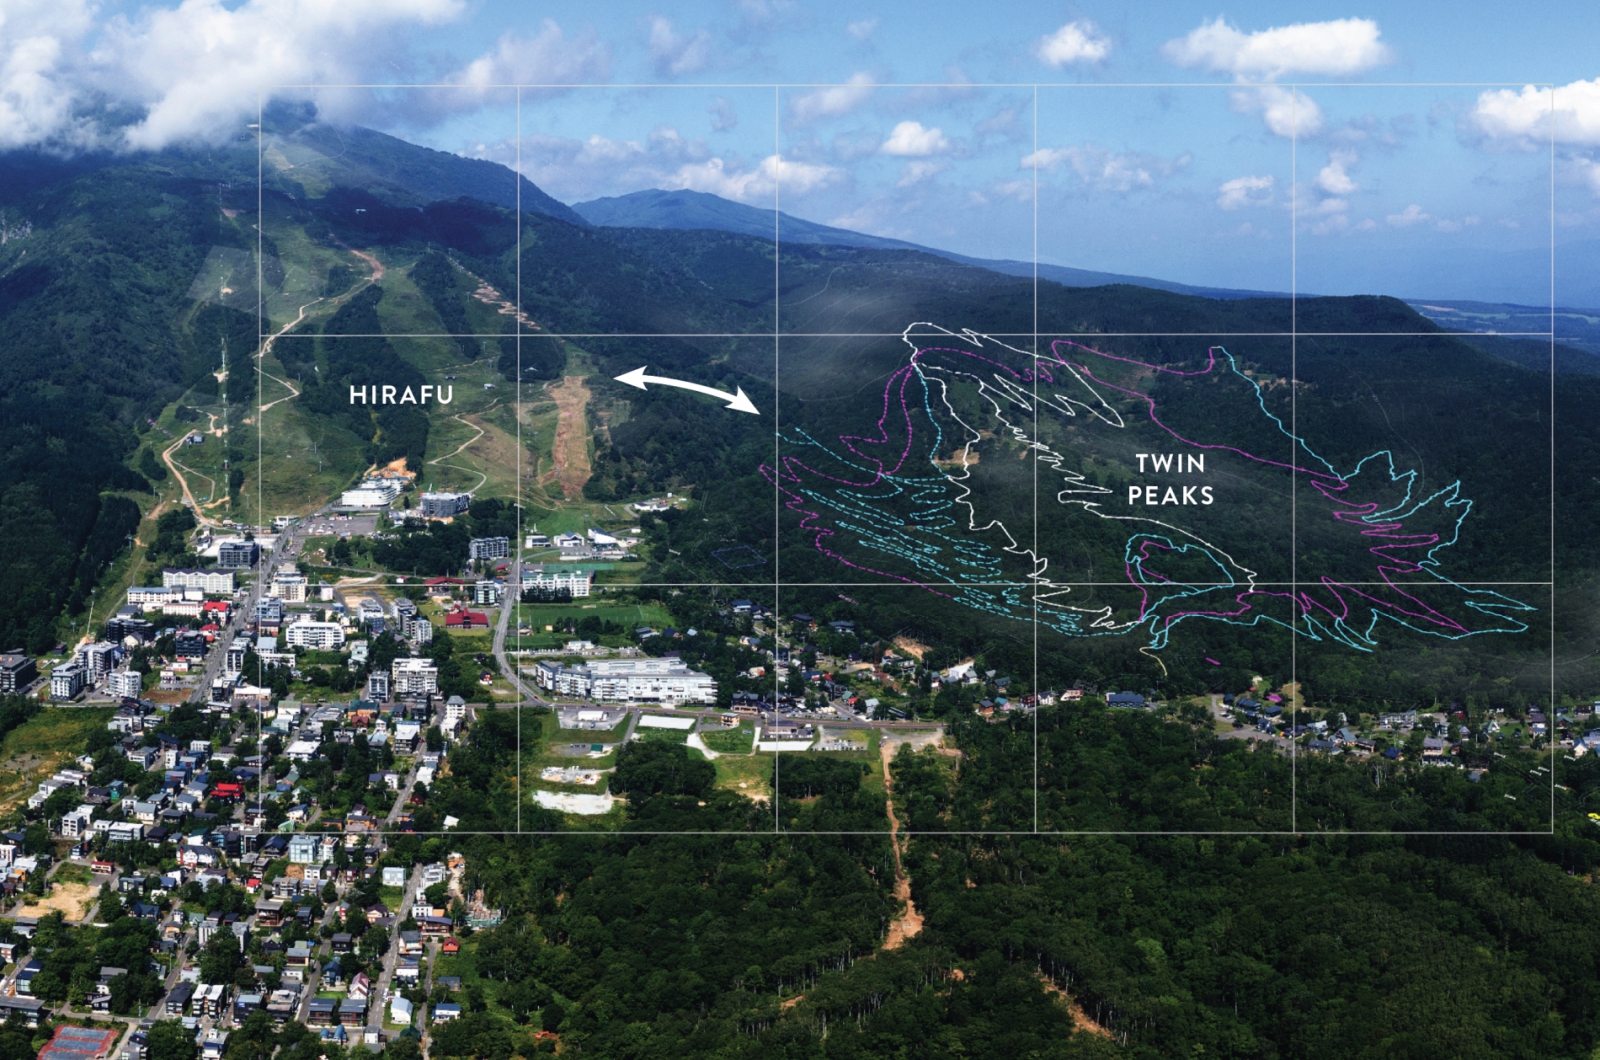 Grand HIRAFU Connects with Twin Peaks Mountain Bike Parkの画像